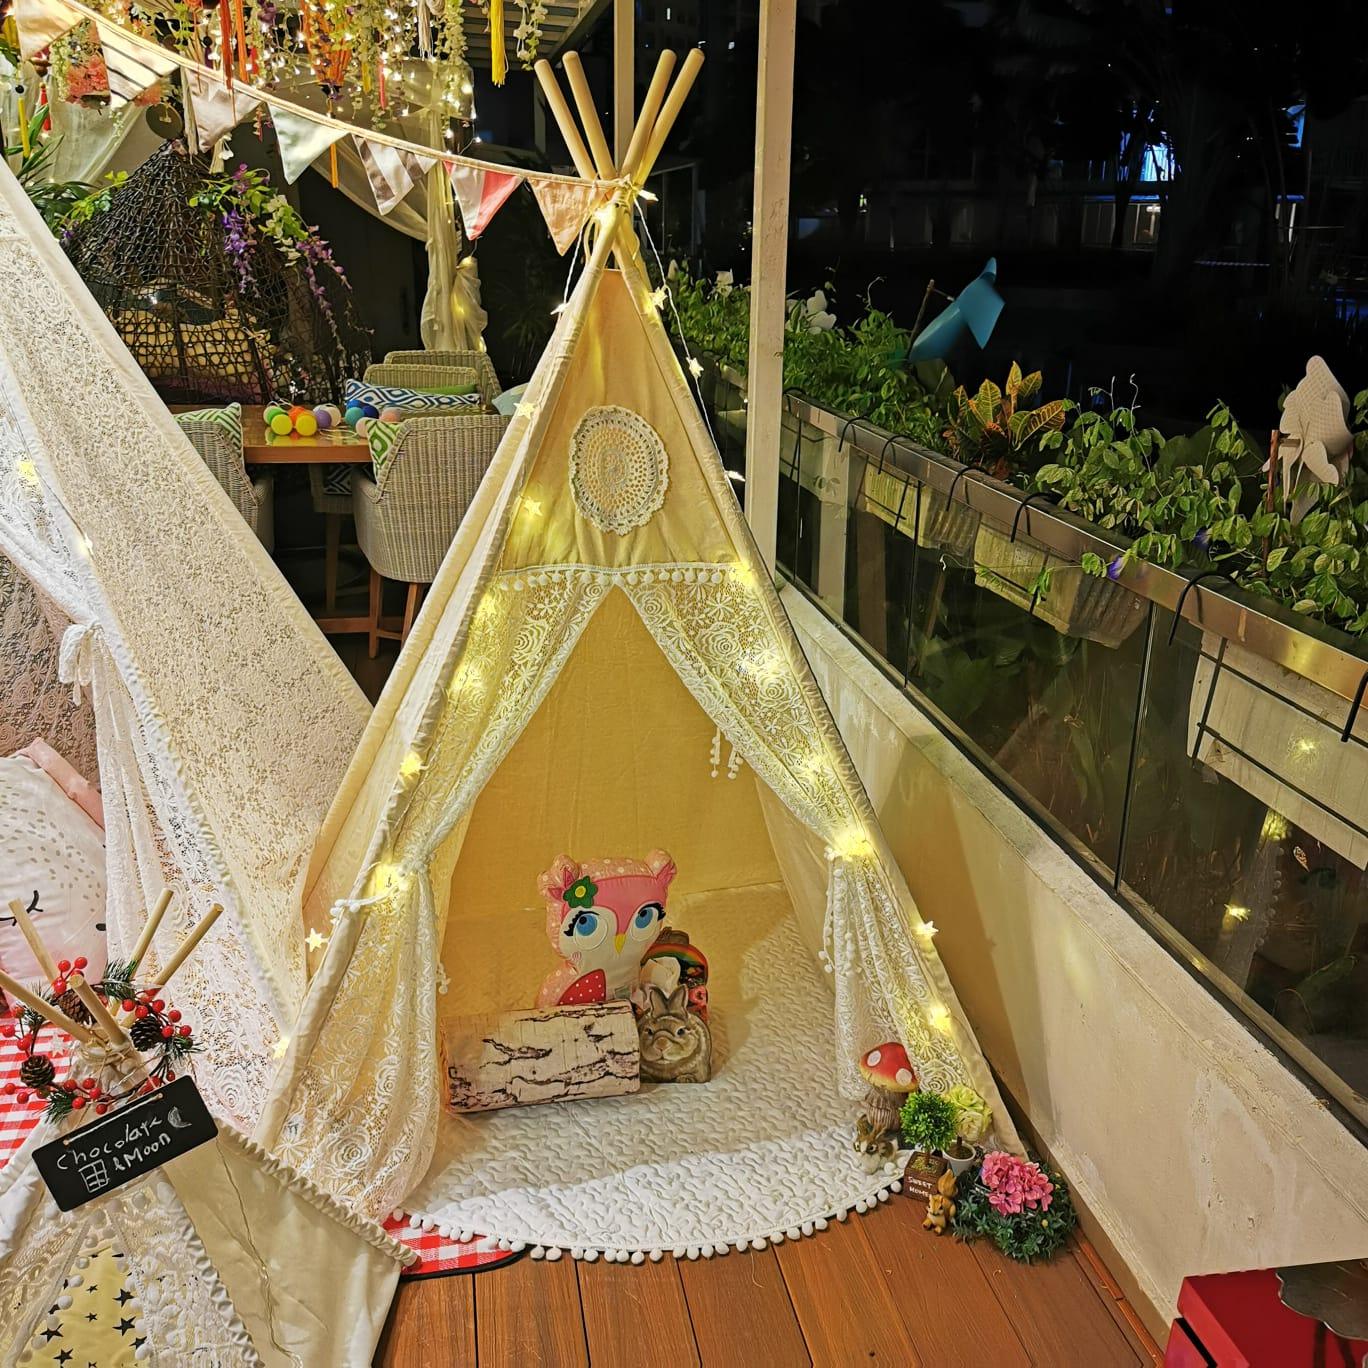 PETIT Dream Lace Teepee With Mat and Lights - Kids Haven